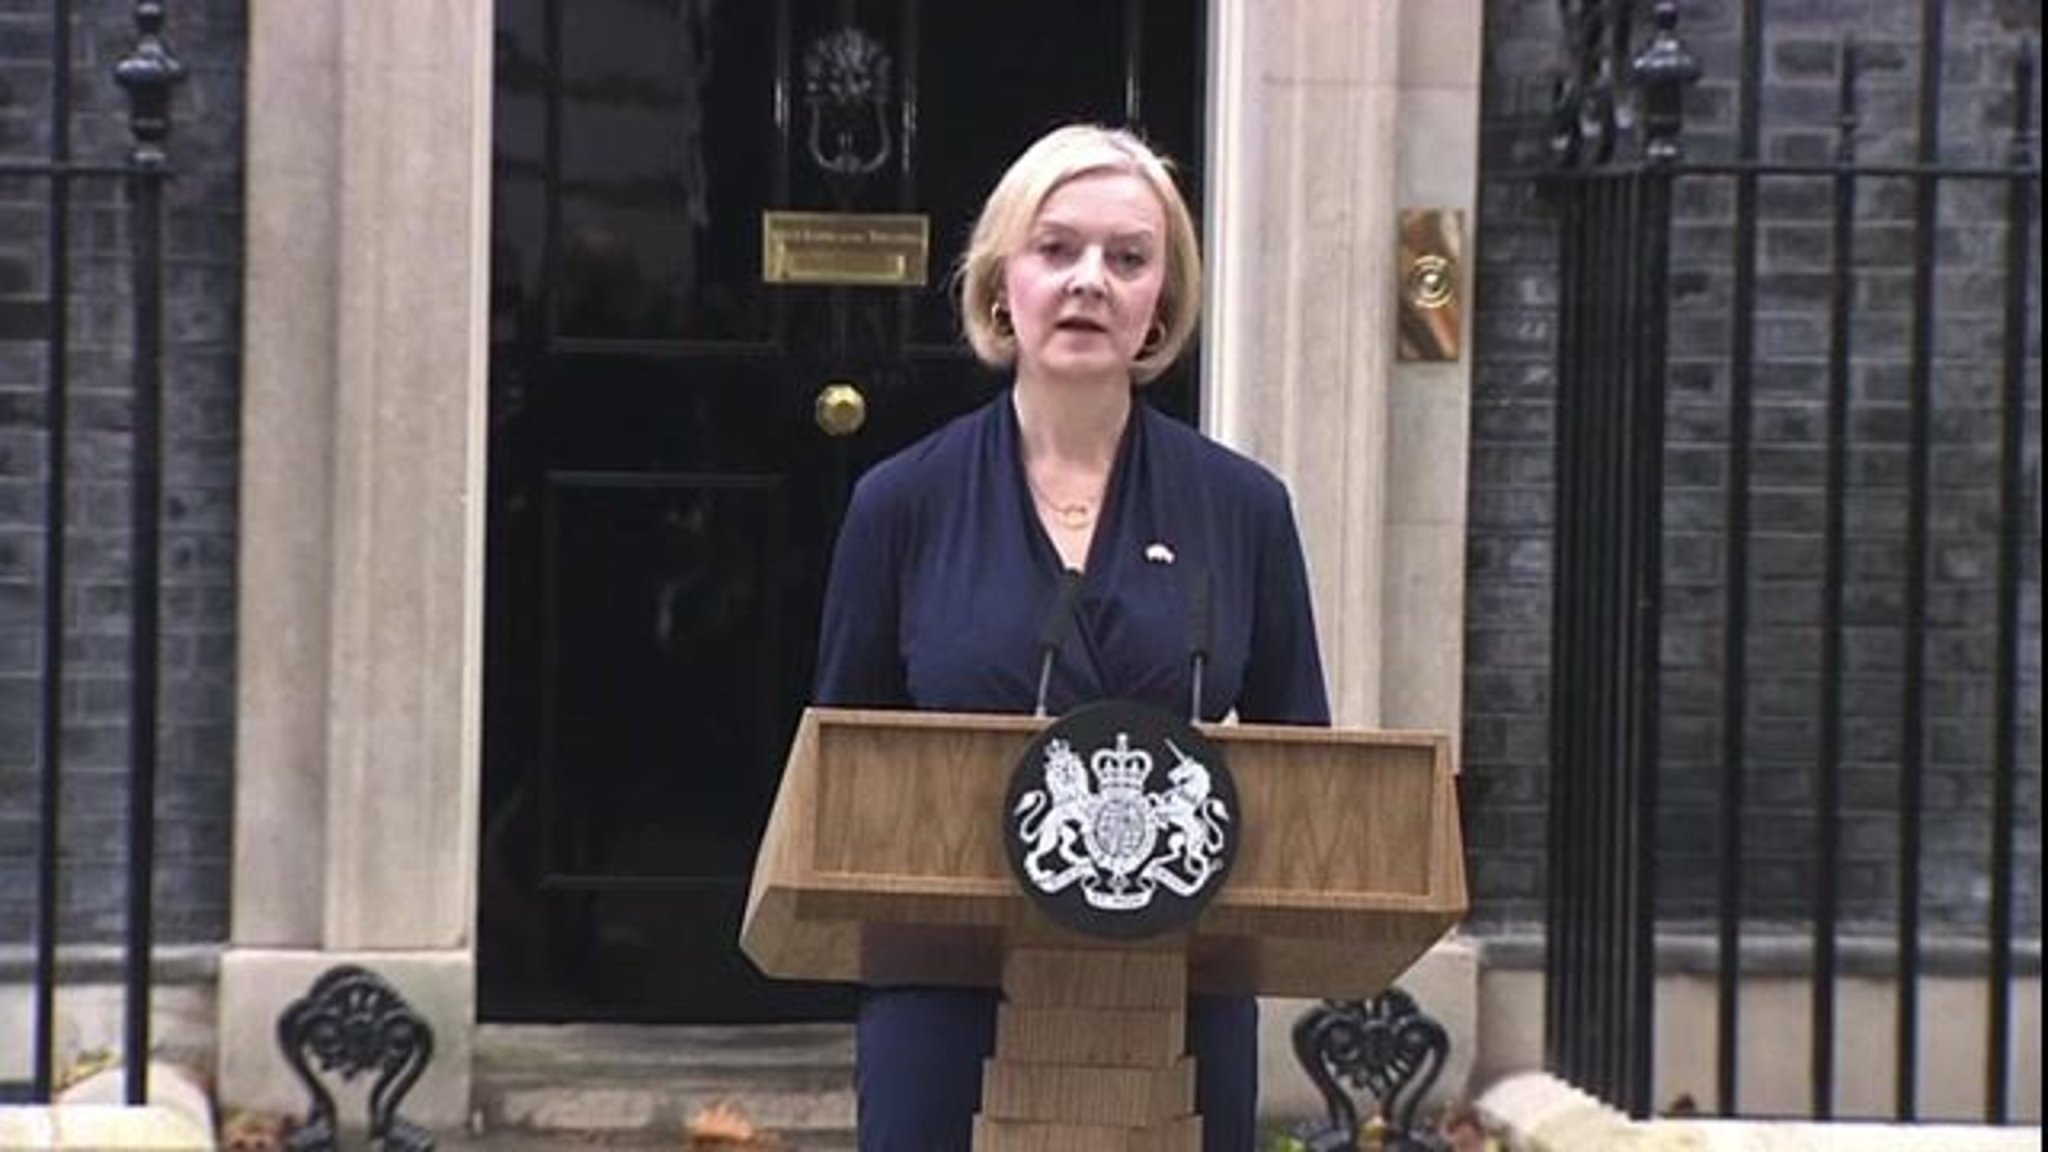 Liz Truss announces she will be resigning, making her the shortest-serving prime minister in U.K. history.